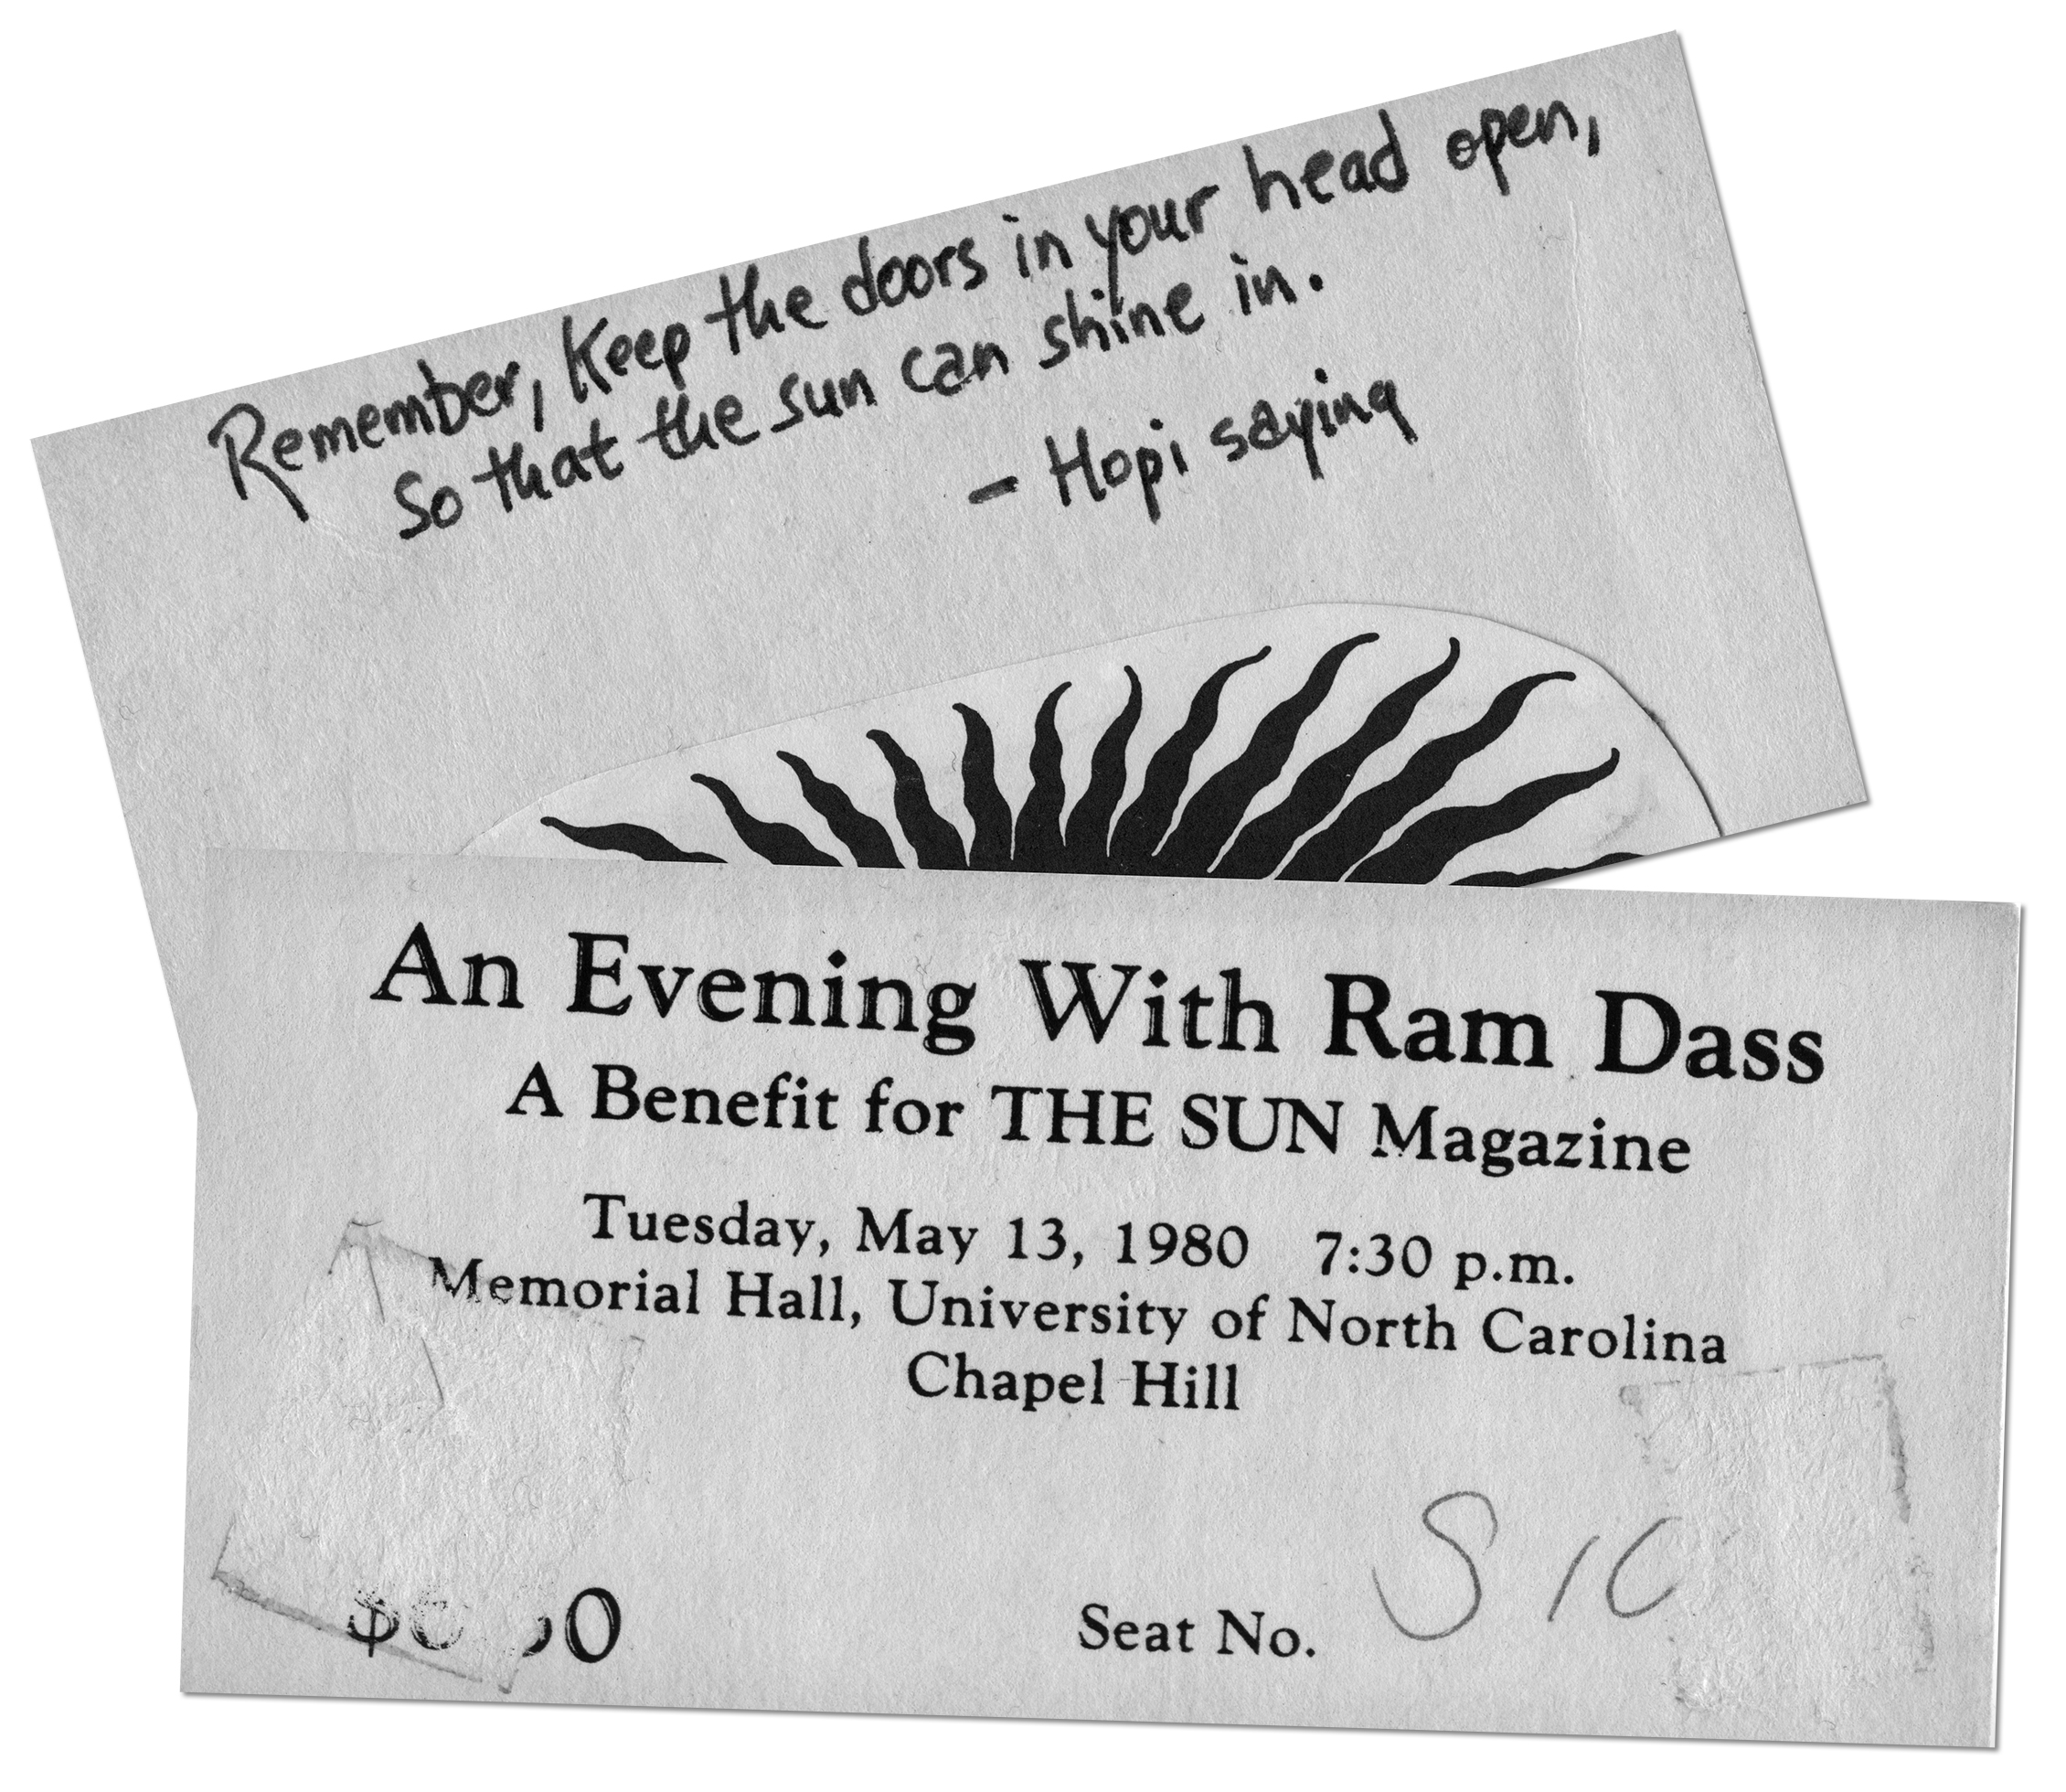 Ticket to "An Evening with Ram Dass: A Benefit for The Sun Magazine," May 13, 1980, at Memorial Hall, University of North Carolina. On the back is a handwritten note: Remember, keep the doors in your head open, so that the sun can shine in. Hopi saying.